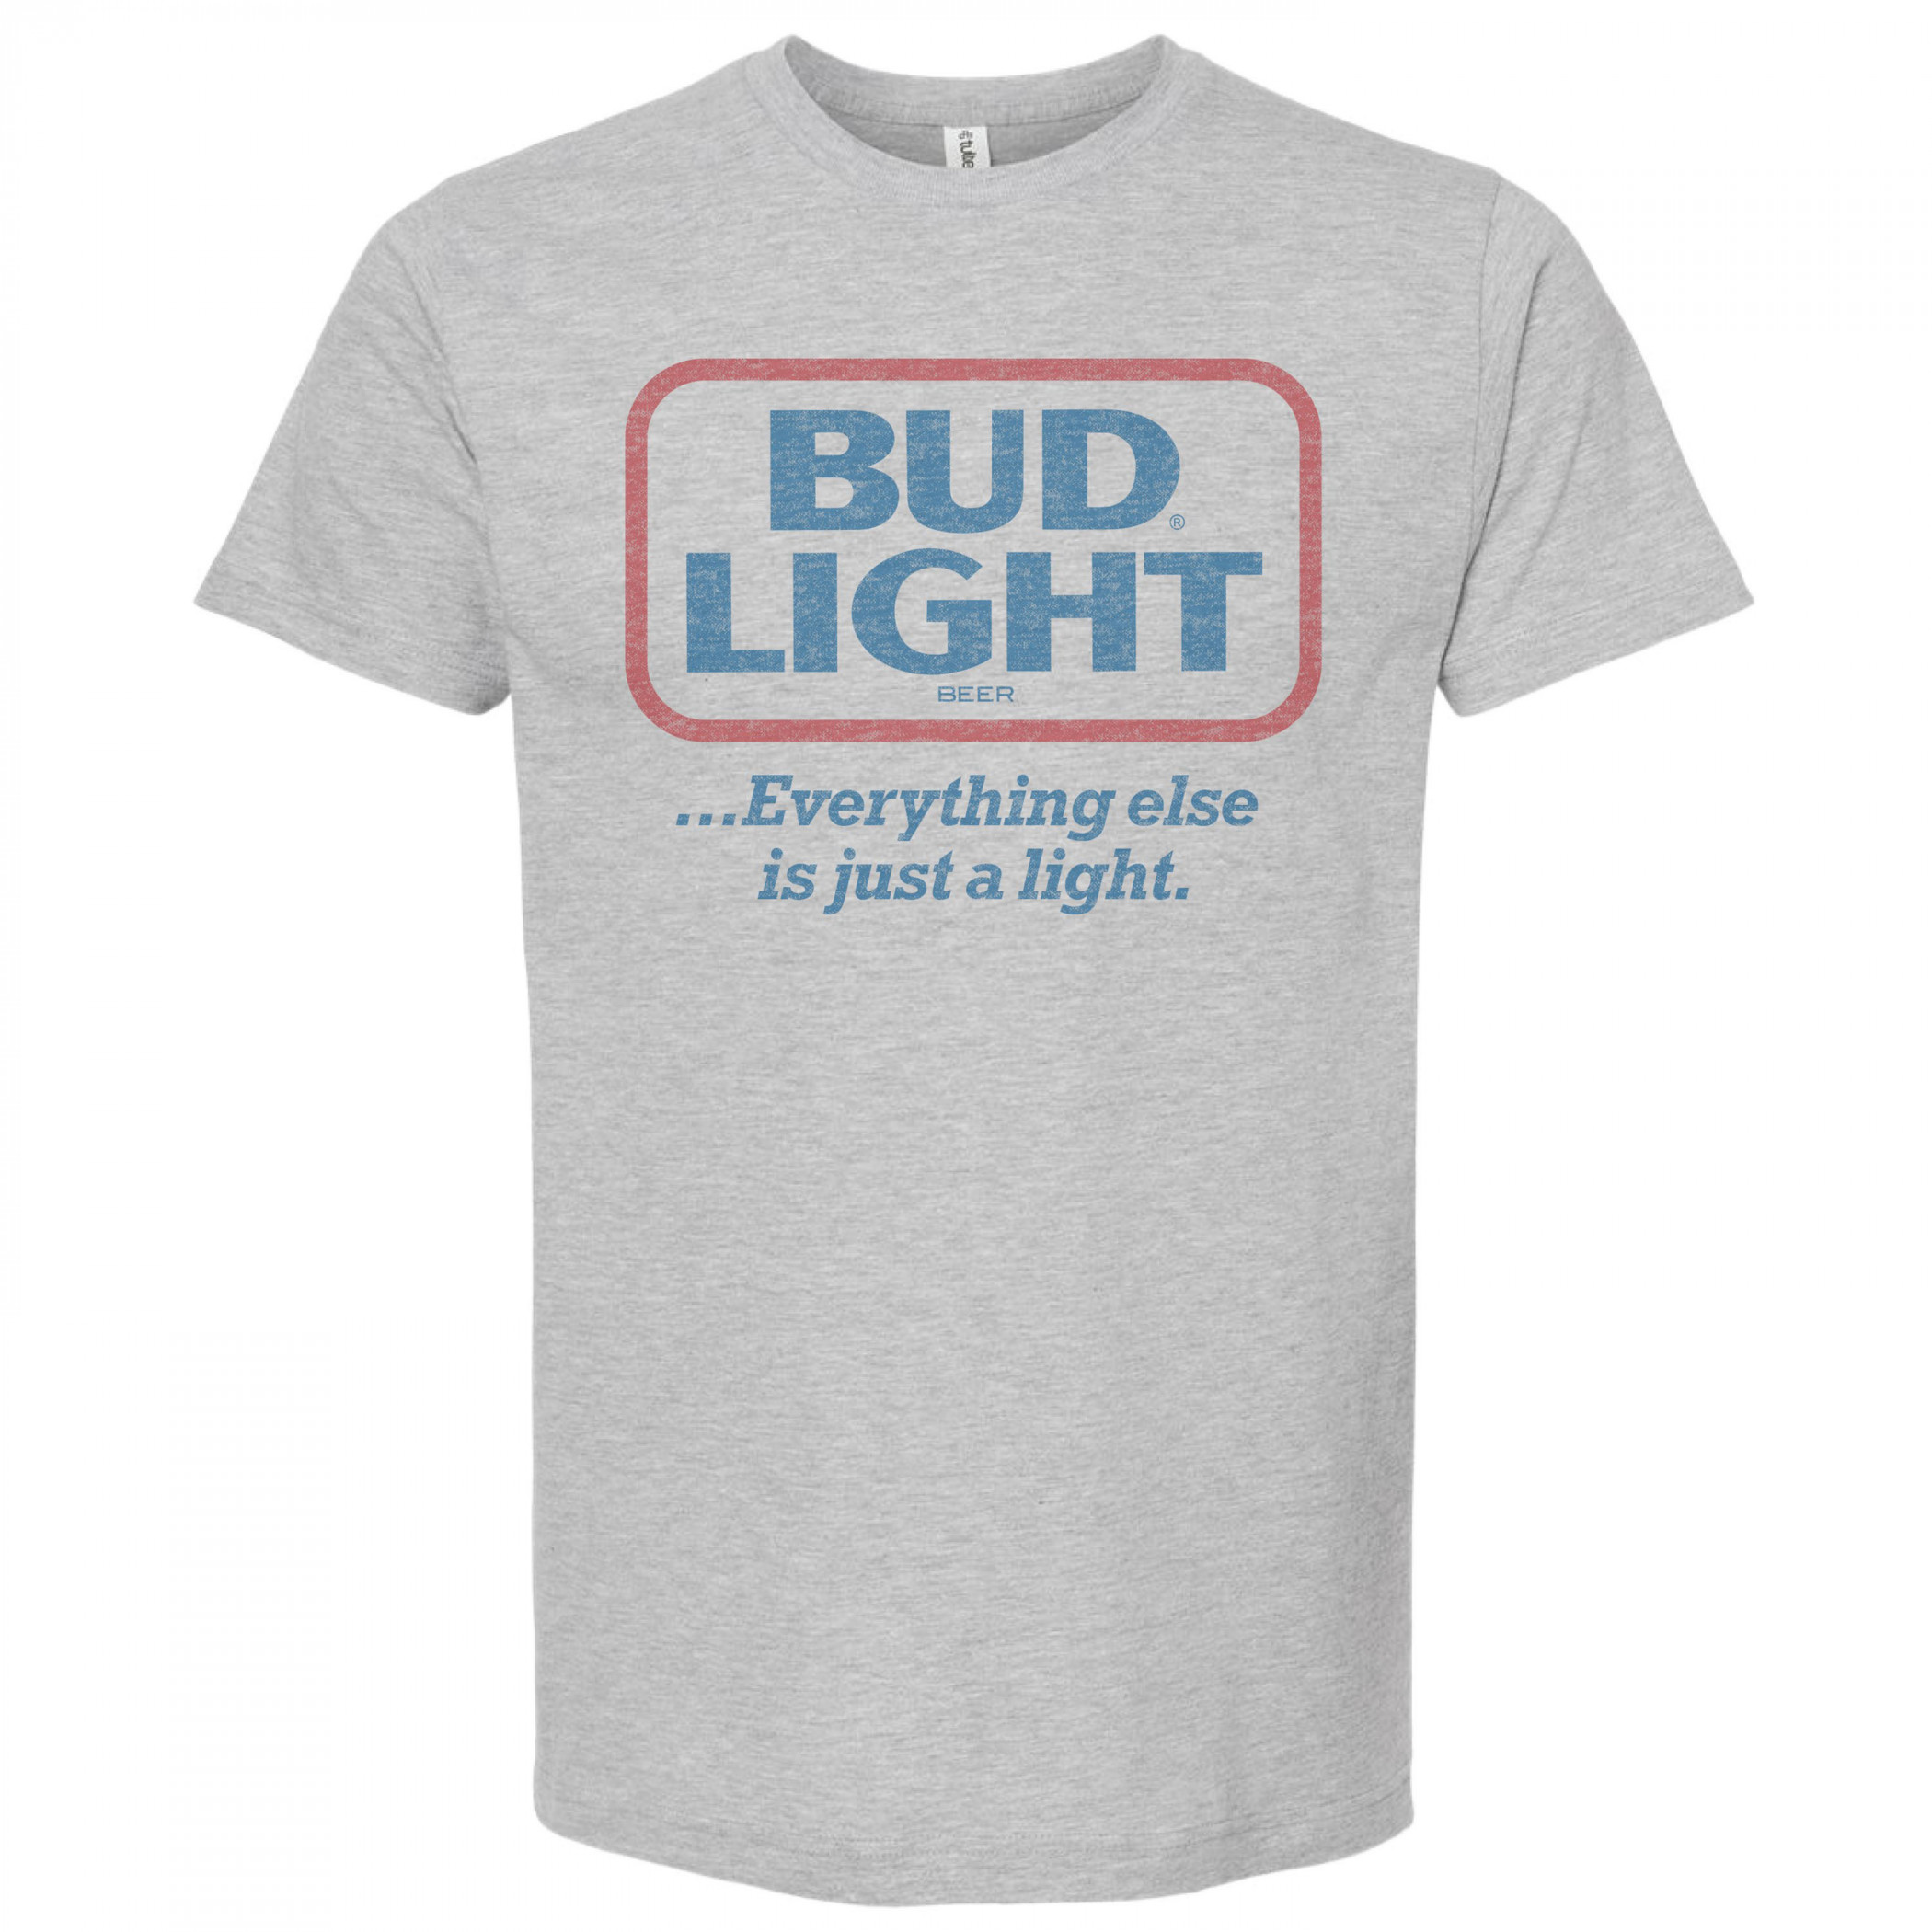 Bud Light Everything Else is Just a Light T-Shirt